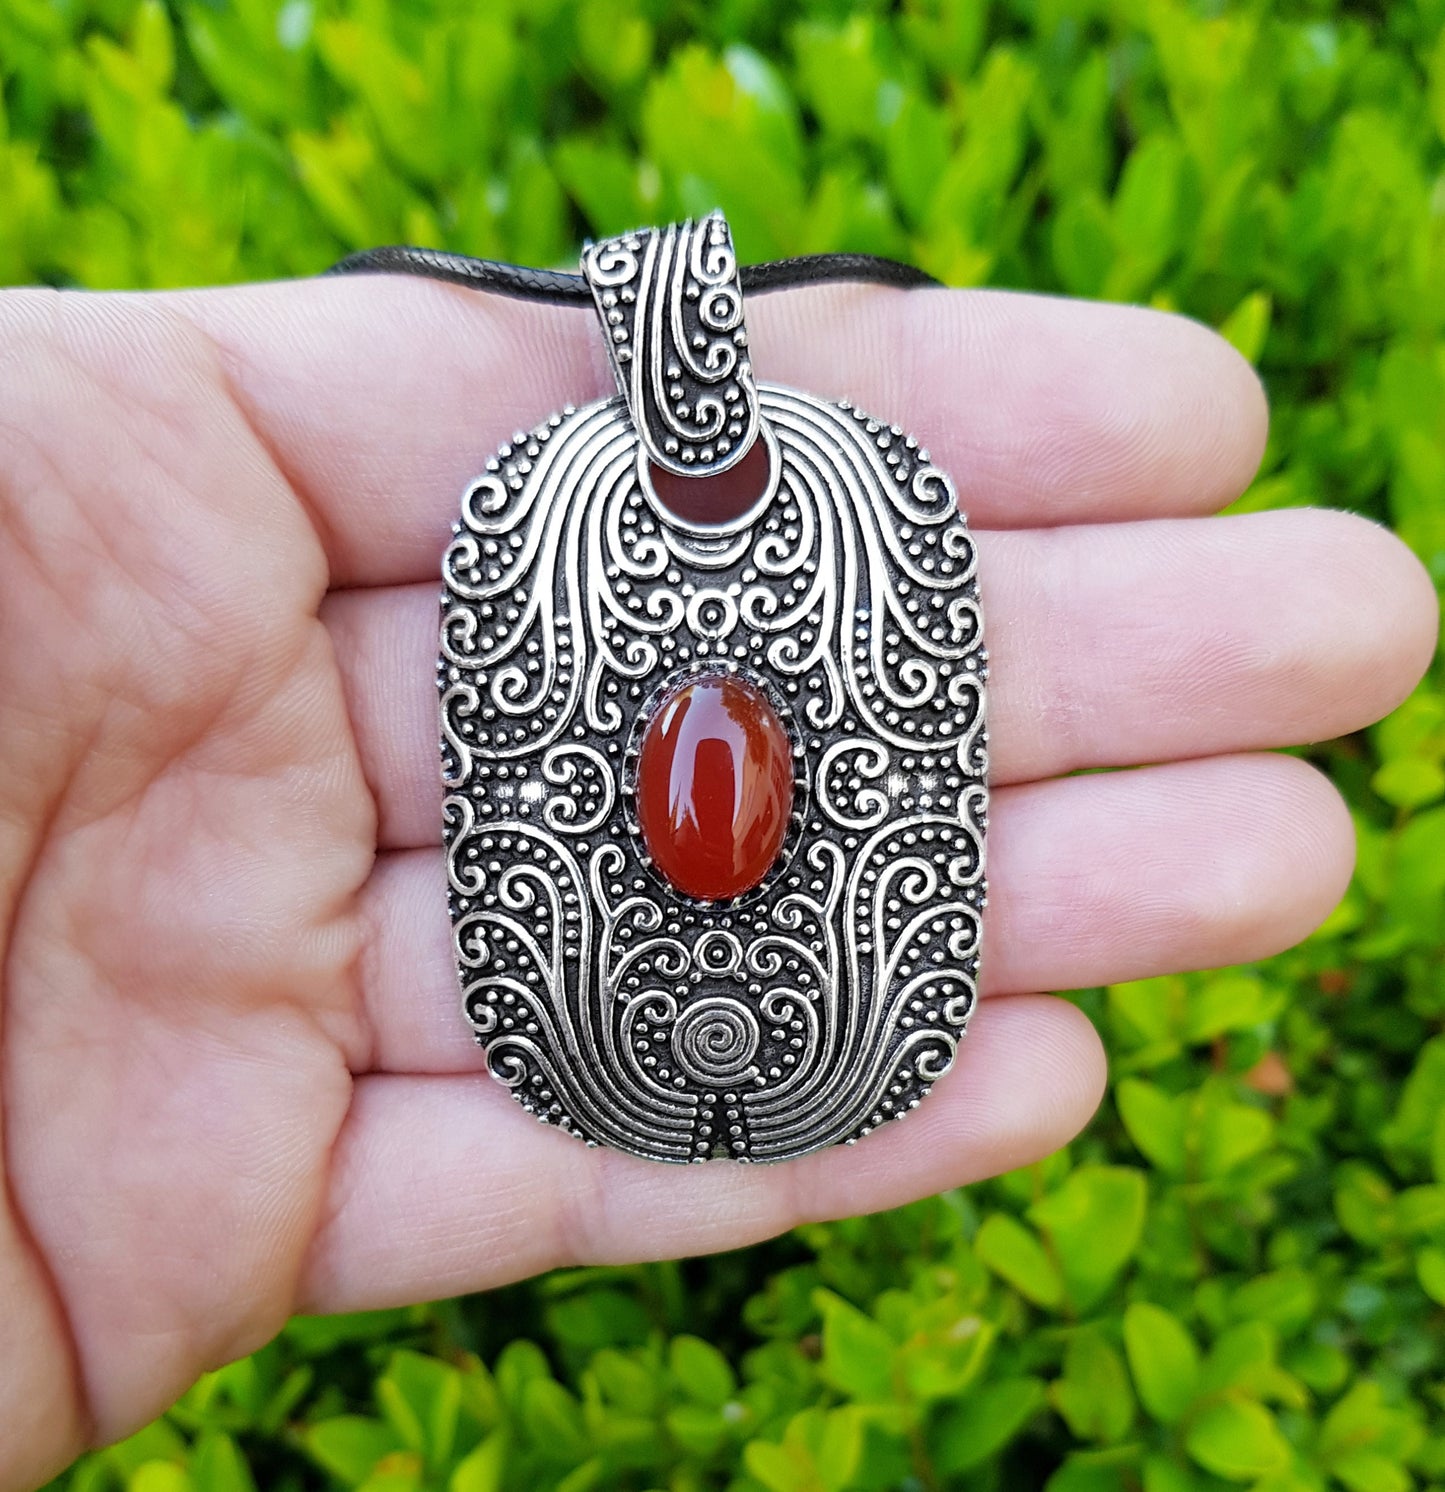 Big Labradorite And Carnelian Pendant In Sterling Silver Boho Crystal Necklace Gothic Necklace GypsyJewelry One Of A Kind Gift